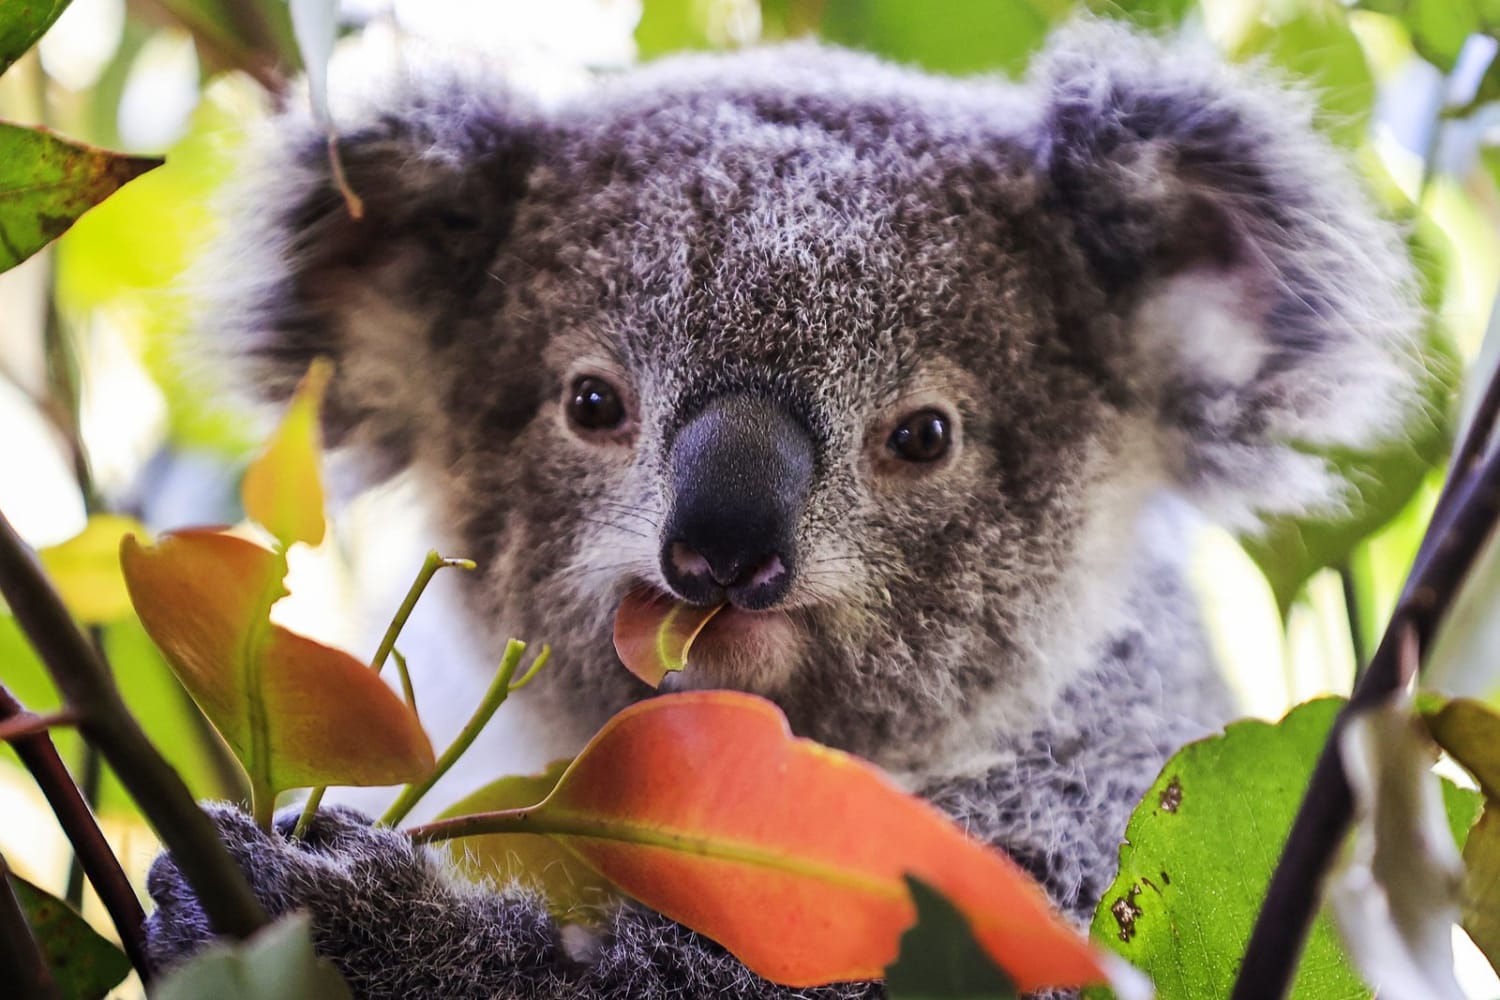 Australia Begins Vaccinating Hundreds of Koalas Against Chlamydia in New Trial The infection affects at least half of koalas living in southeast Queensland and New South Wales